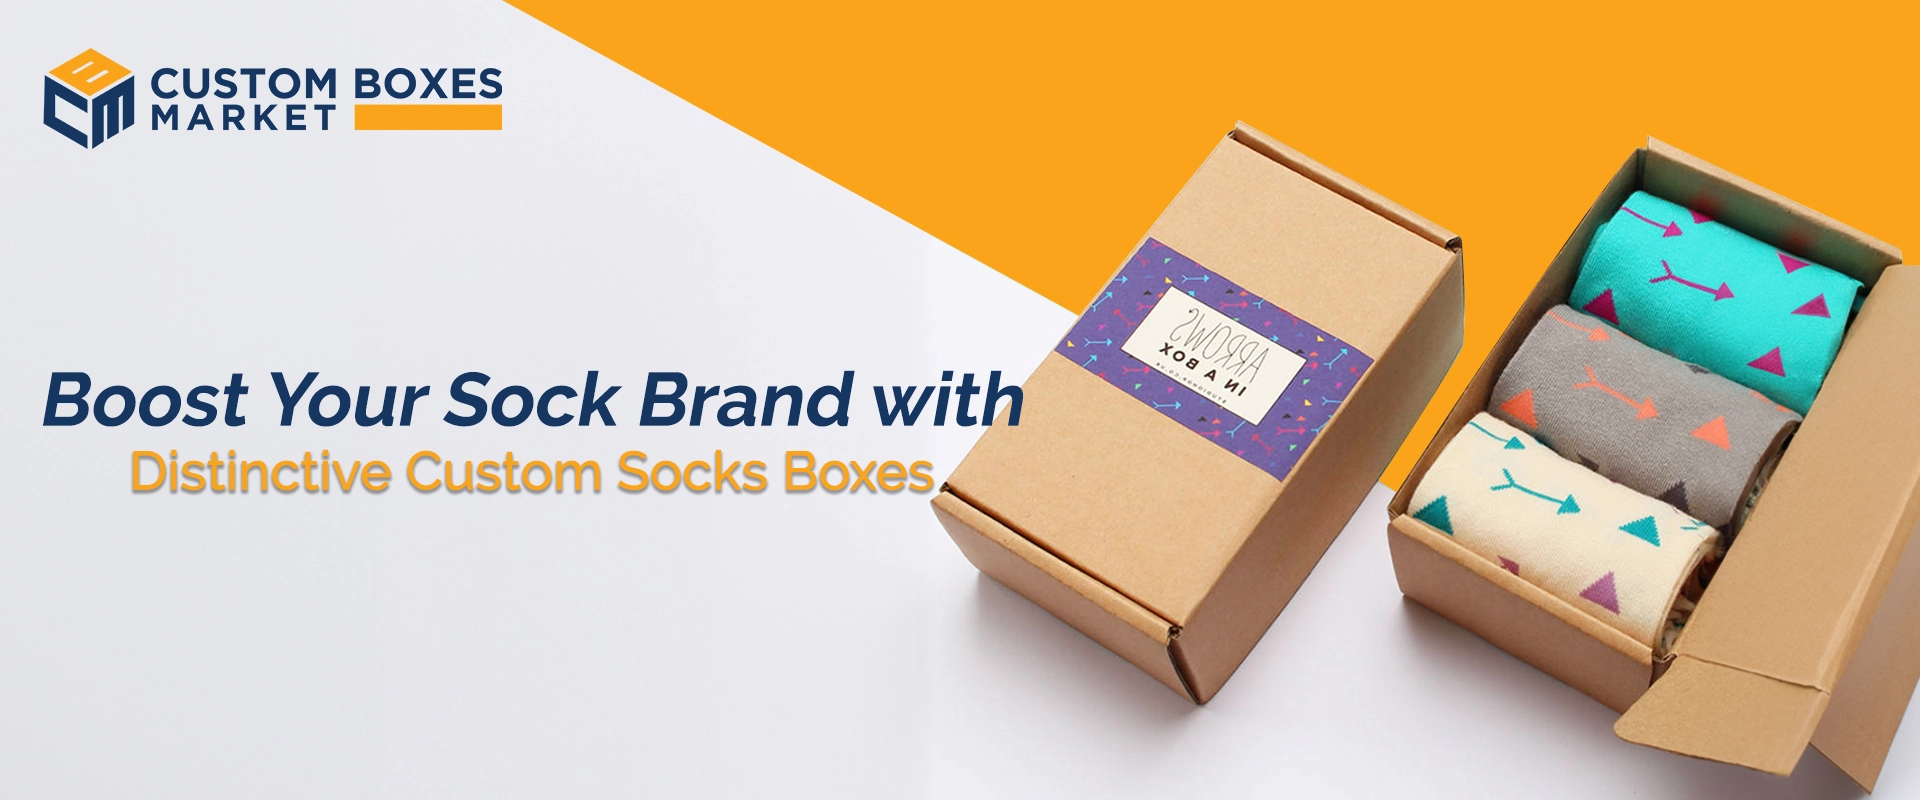 Boost Your Sock Brand with Distinctive Custom Socks Boxes